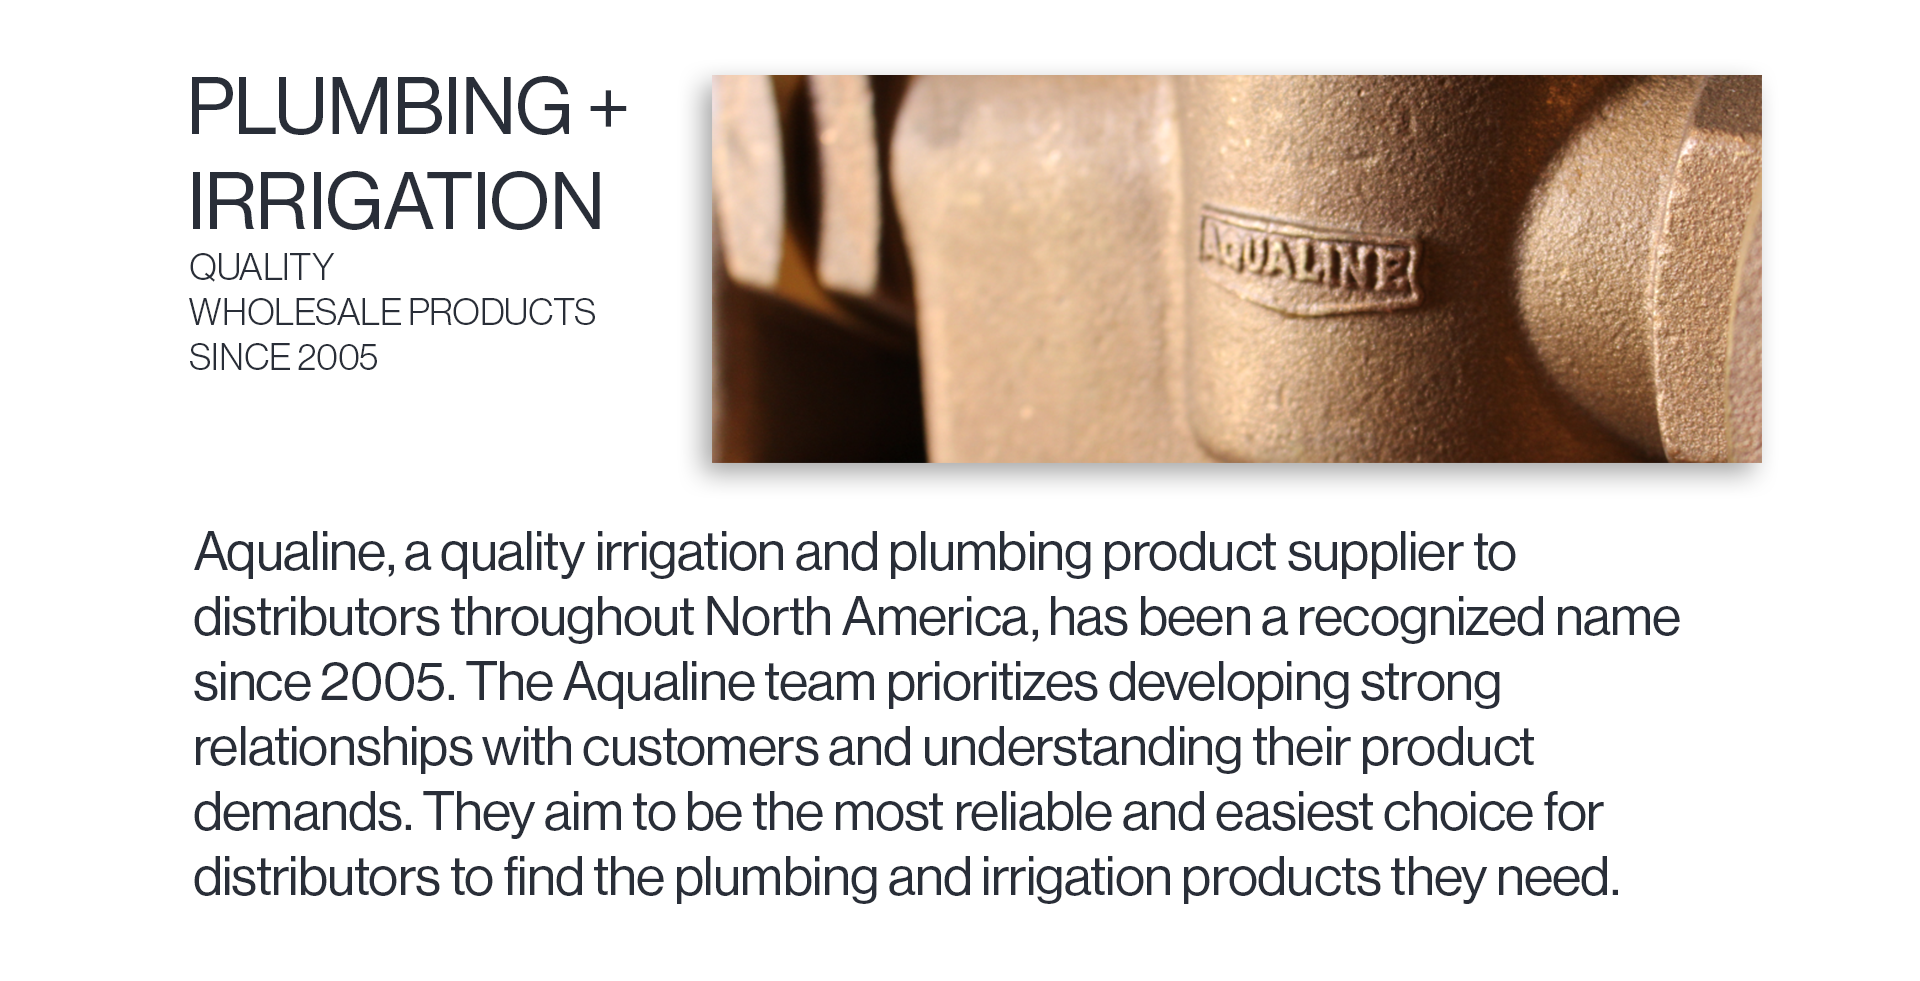 Aqualine, a quality irrigation and plumbing product supplier to distributors throughout North America, has been a recognized name since 2005. The Aqualine team prioritizes developing strong relationships with customers and understanding their product demands. They aim to be the most reliable and easiest choice for distributors to find the plumbing and irrigation products they need.